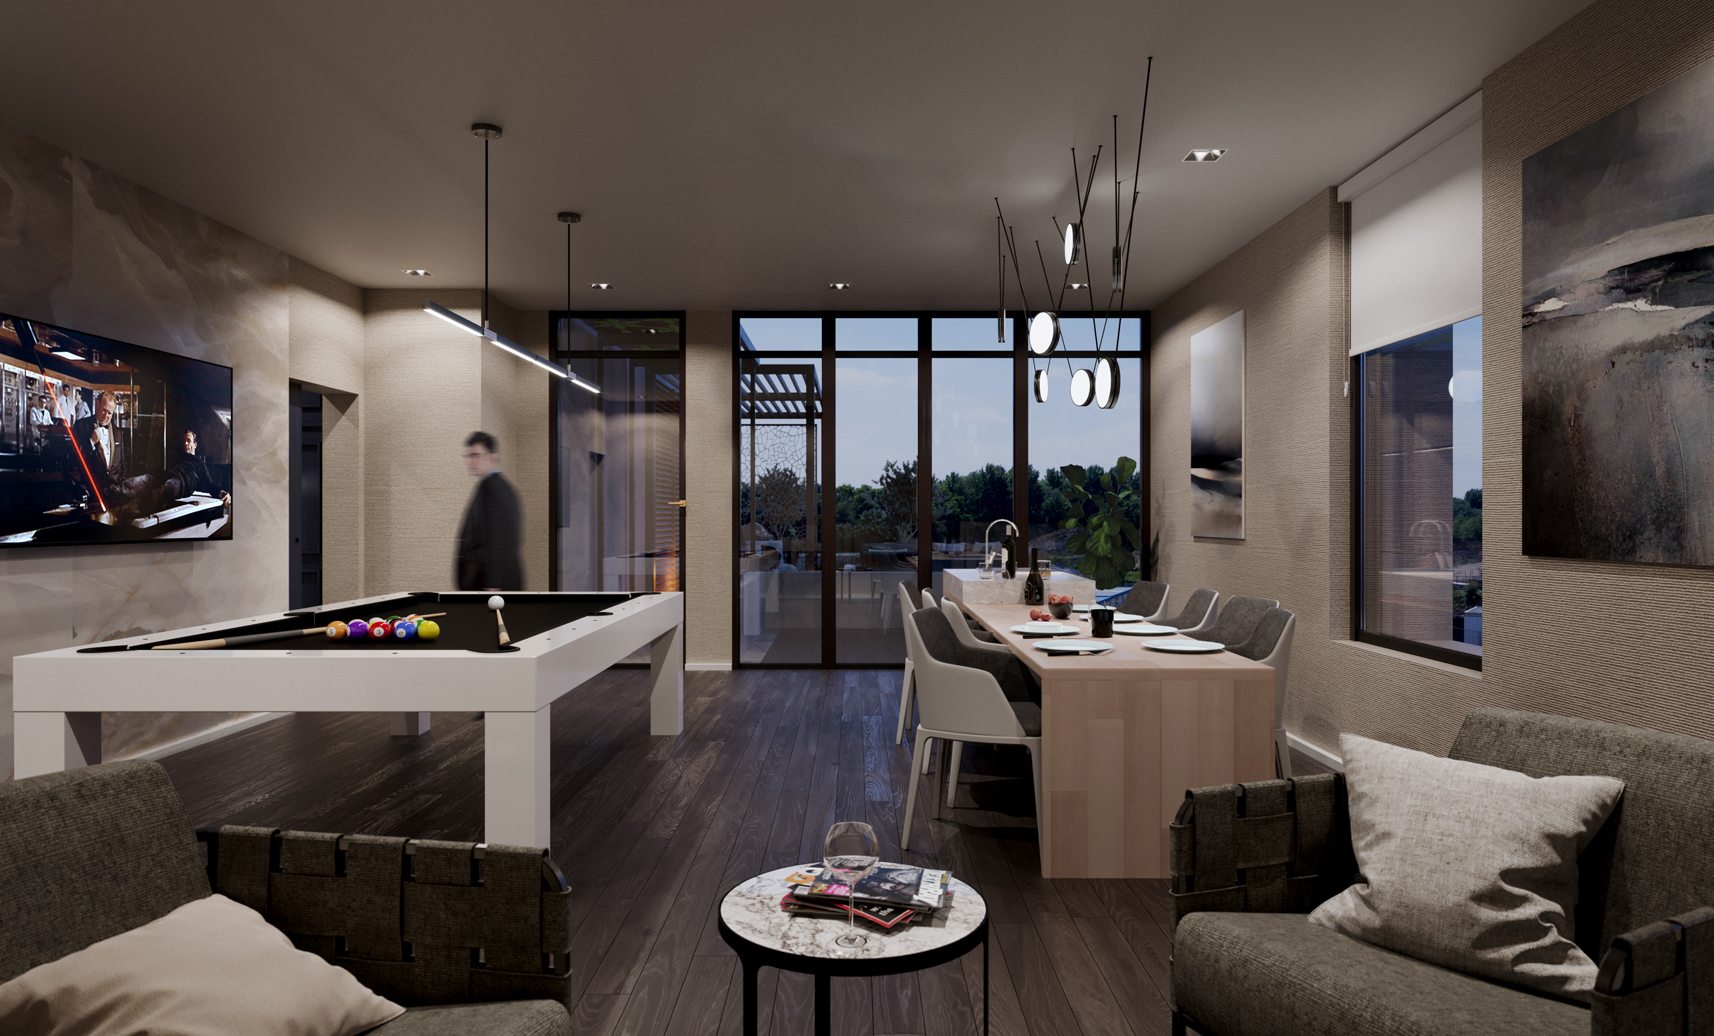 The Cardiff condos rendering of the building interior amenity entertainment room